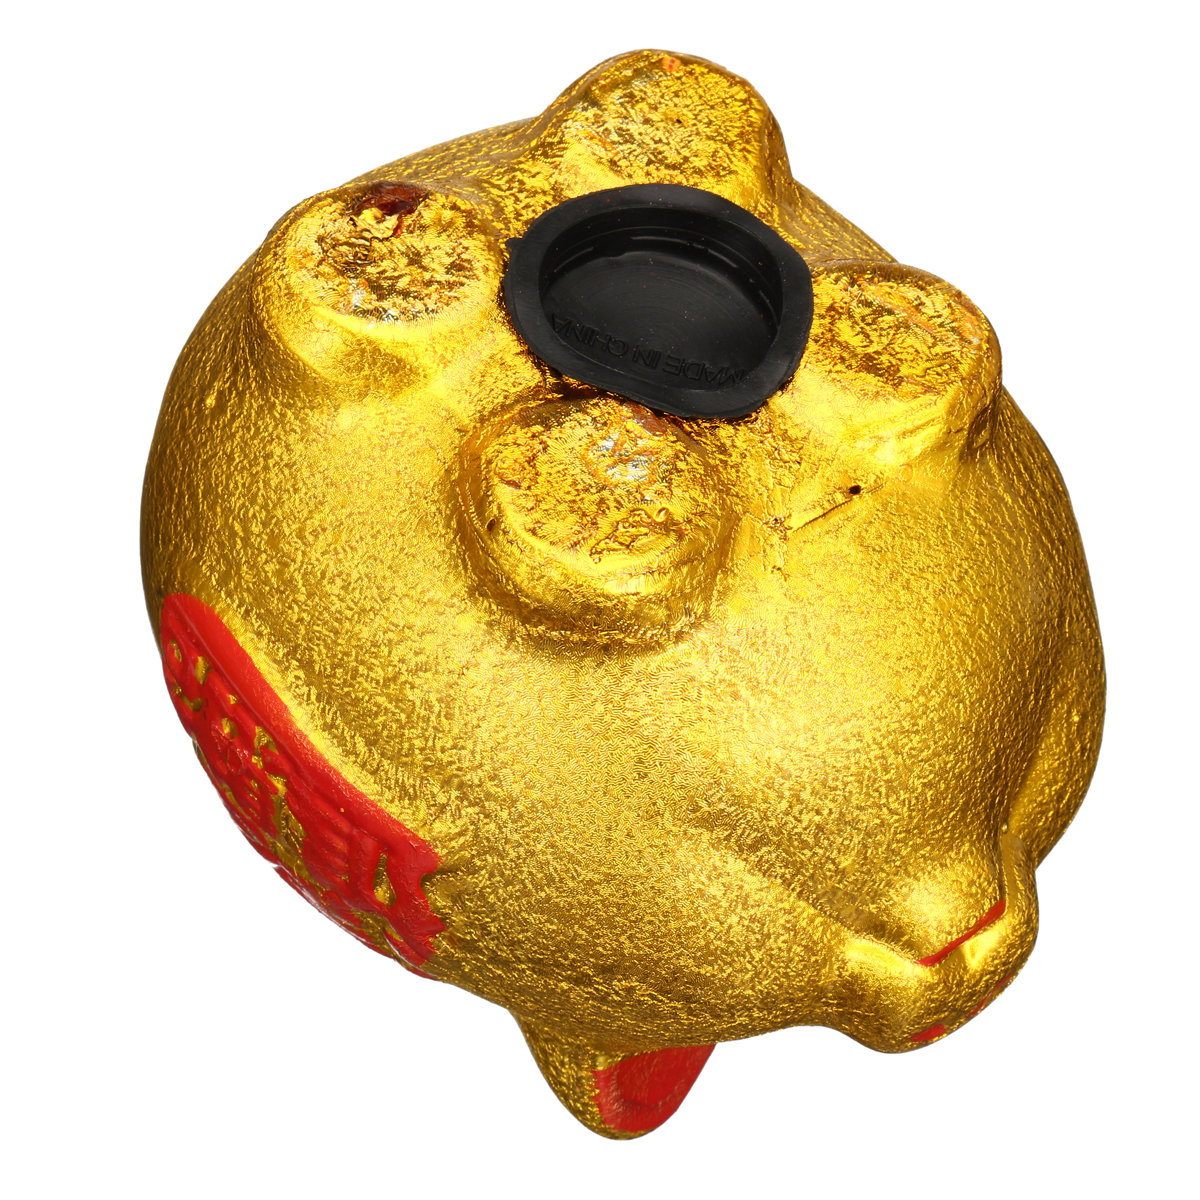 5-Gold-Ceramic-Piggy-Bank-Mini-Cute-Pig-Children-Coin-Collection-Gift-Decorations-1555224-3